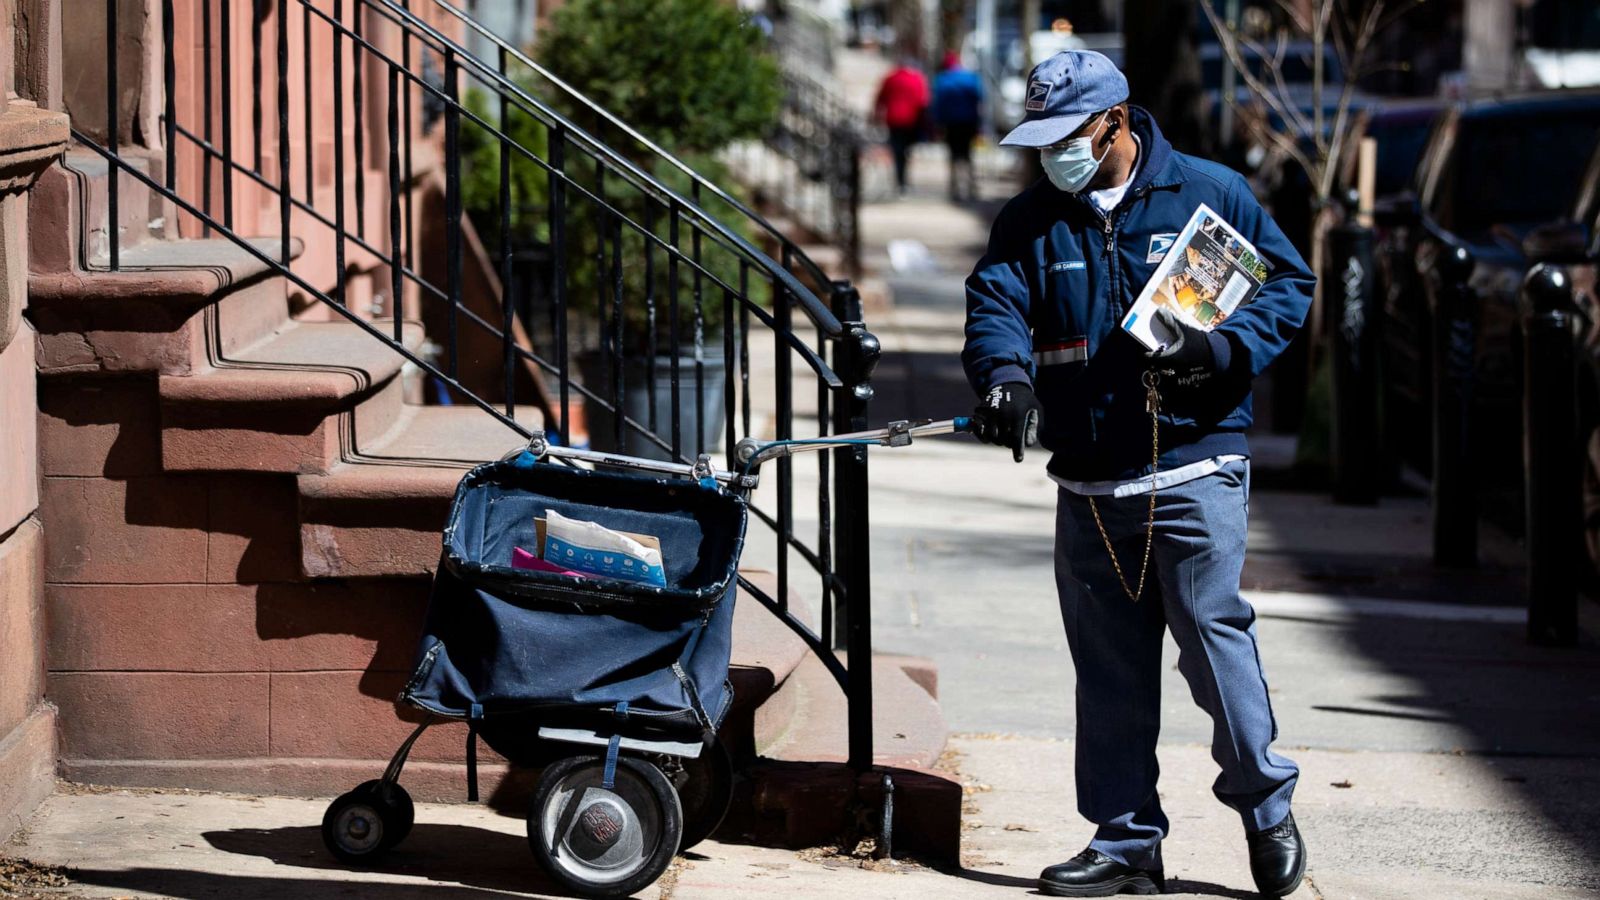 USPS Mailman with Mask and Gloves during the COVID-19 Coronavirus